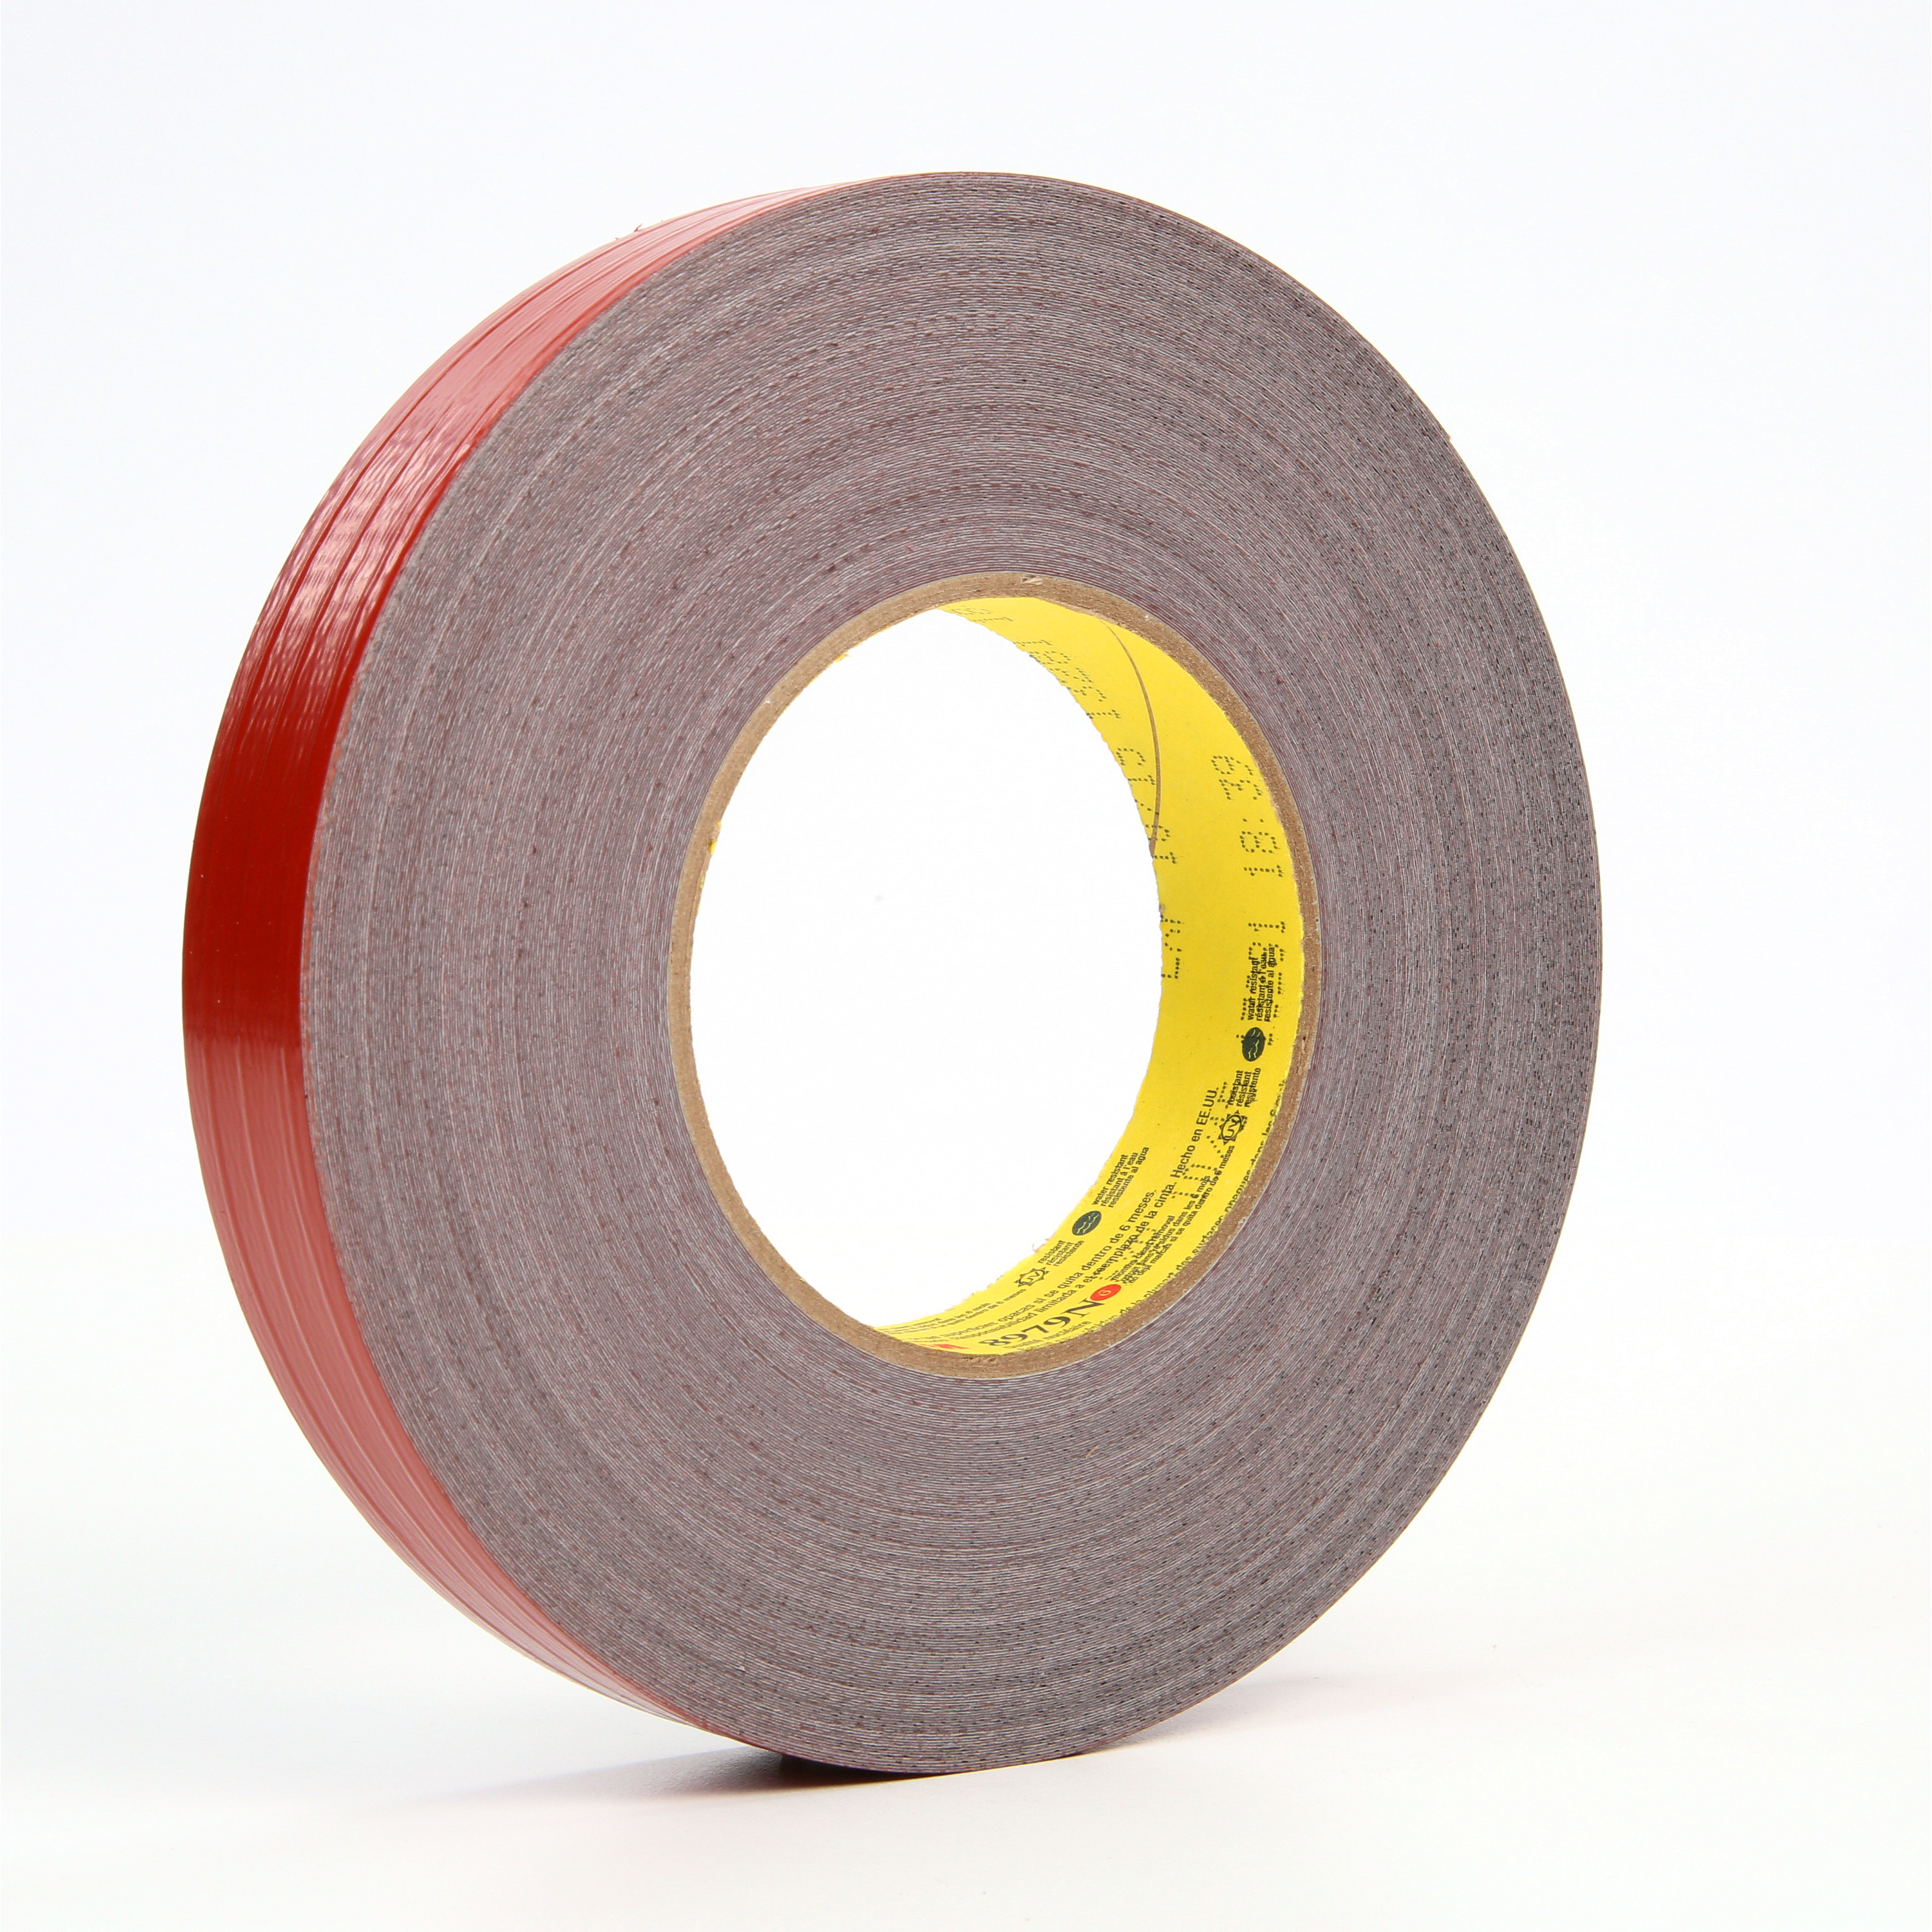 3M™ Performance Plus Duct Tape 8979N (Nuclear), Red, 24 mm x 54.8 m,
12.1 mil, 48 per case